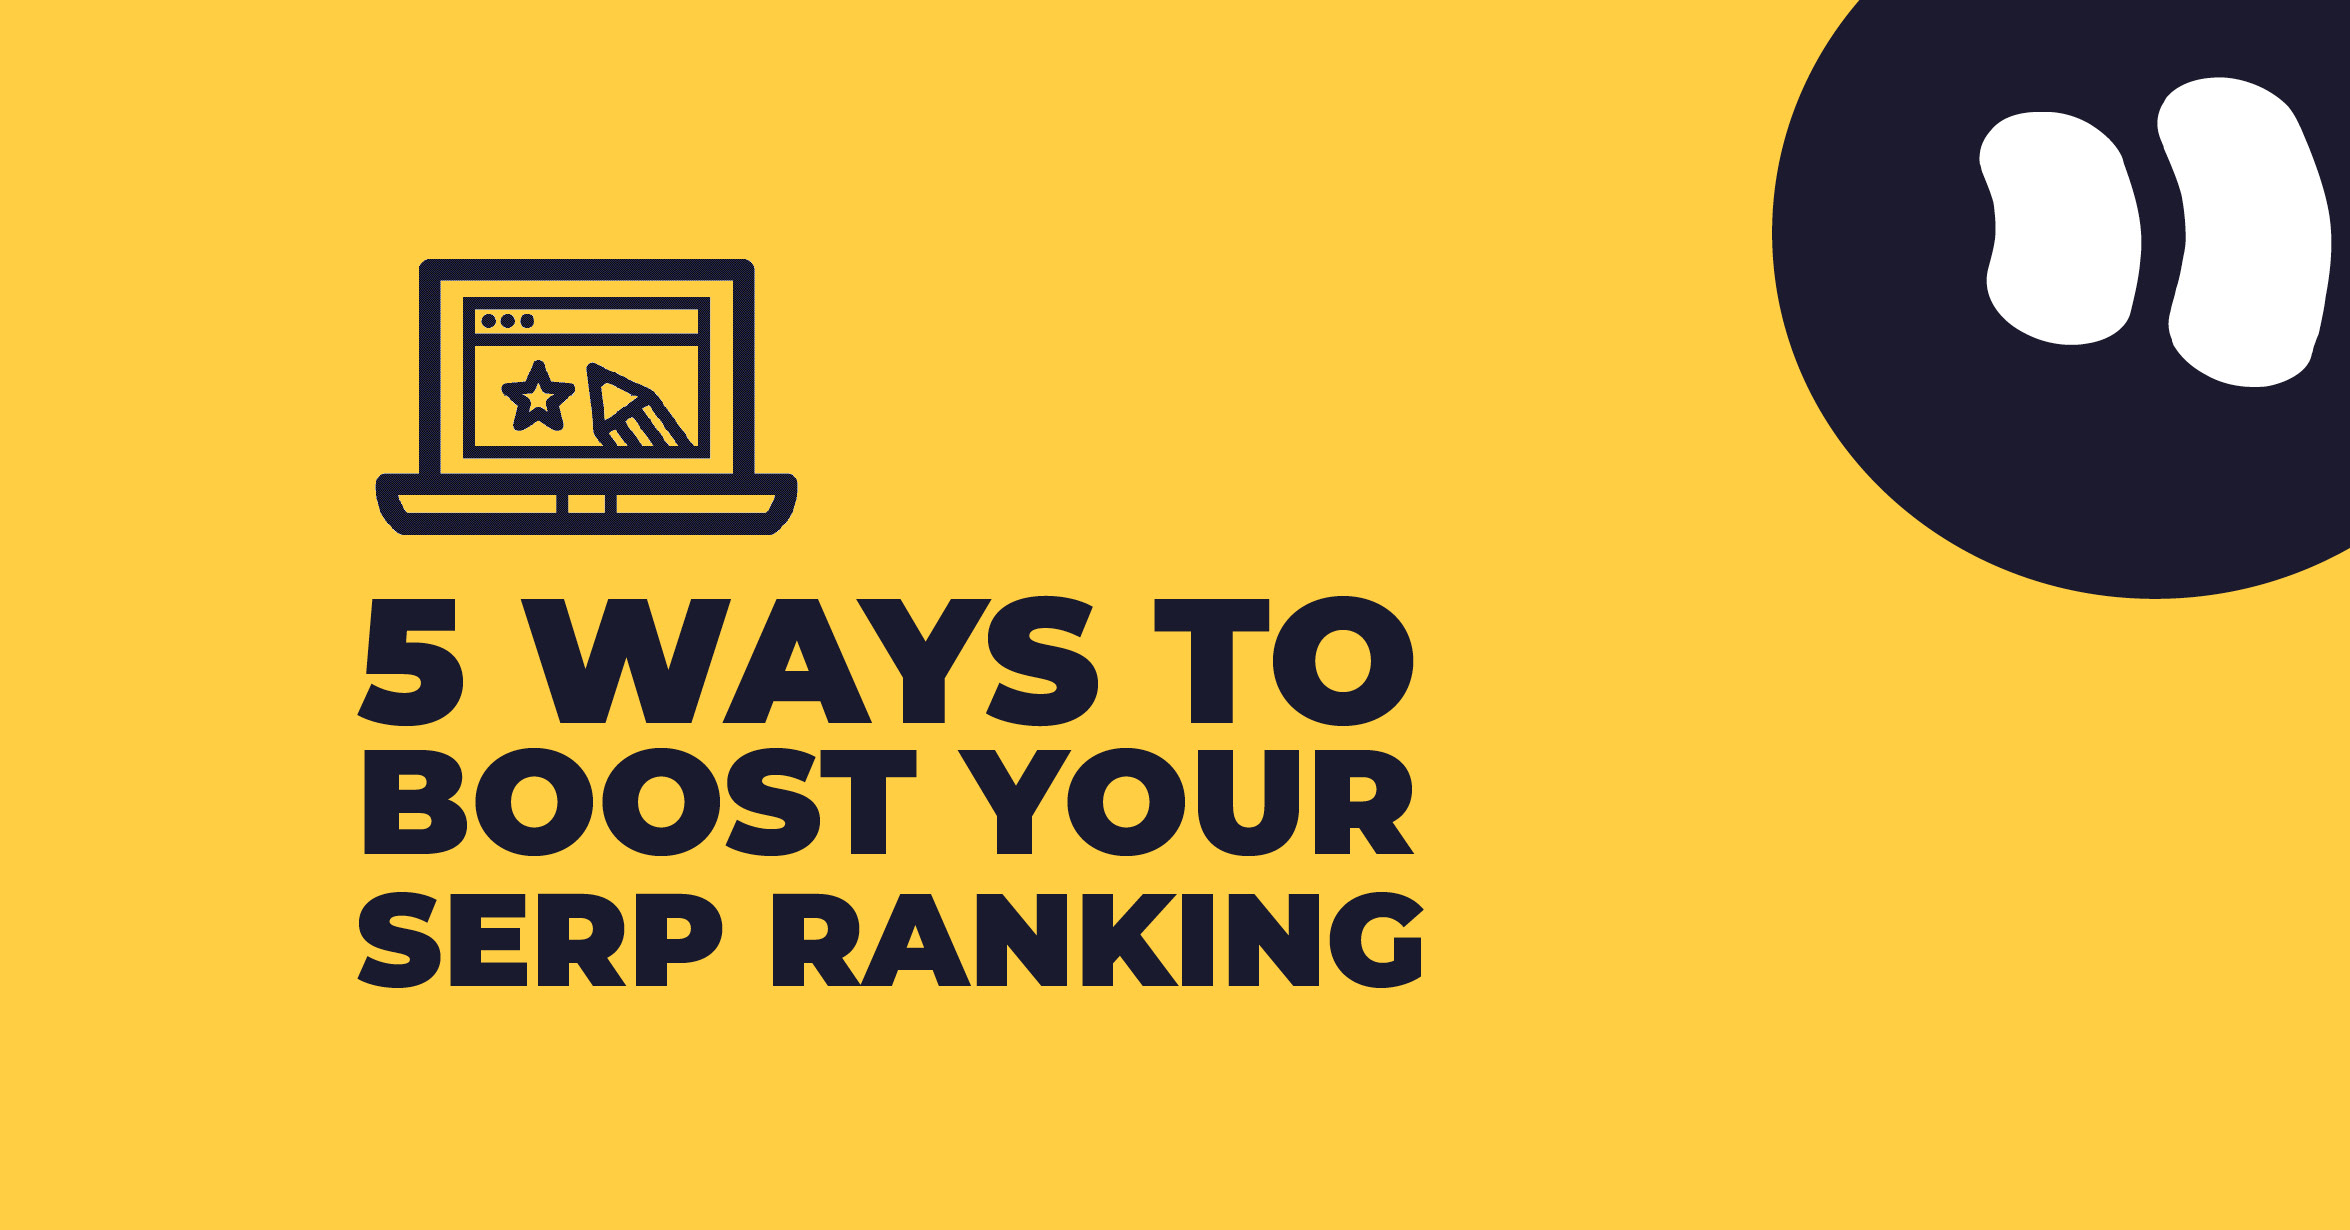 Let’s Boost Your SERP Ranking